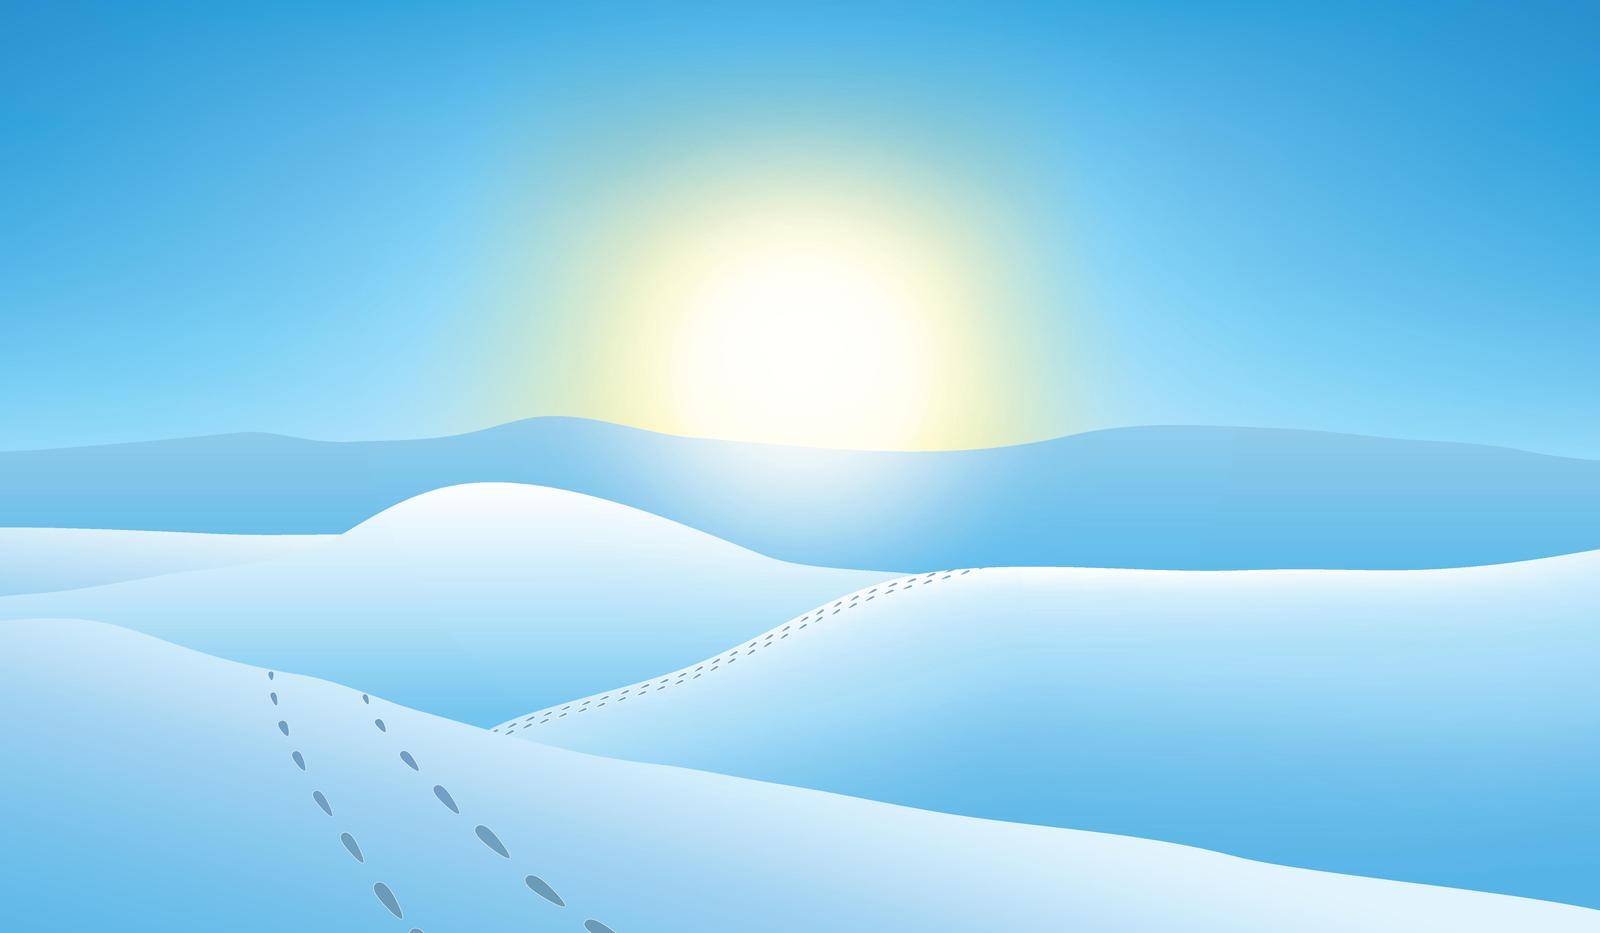 Snowy mountains at sunset. Blue winter landscape vector illustration.